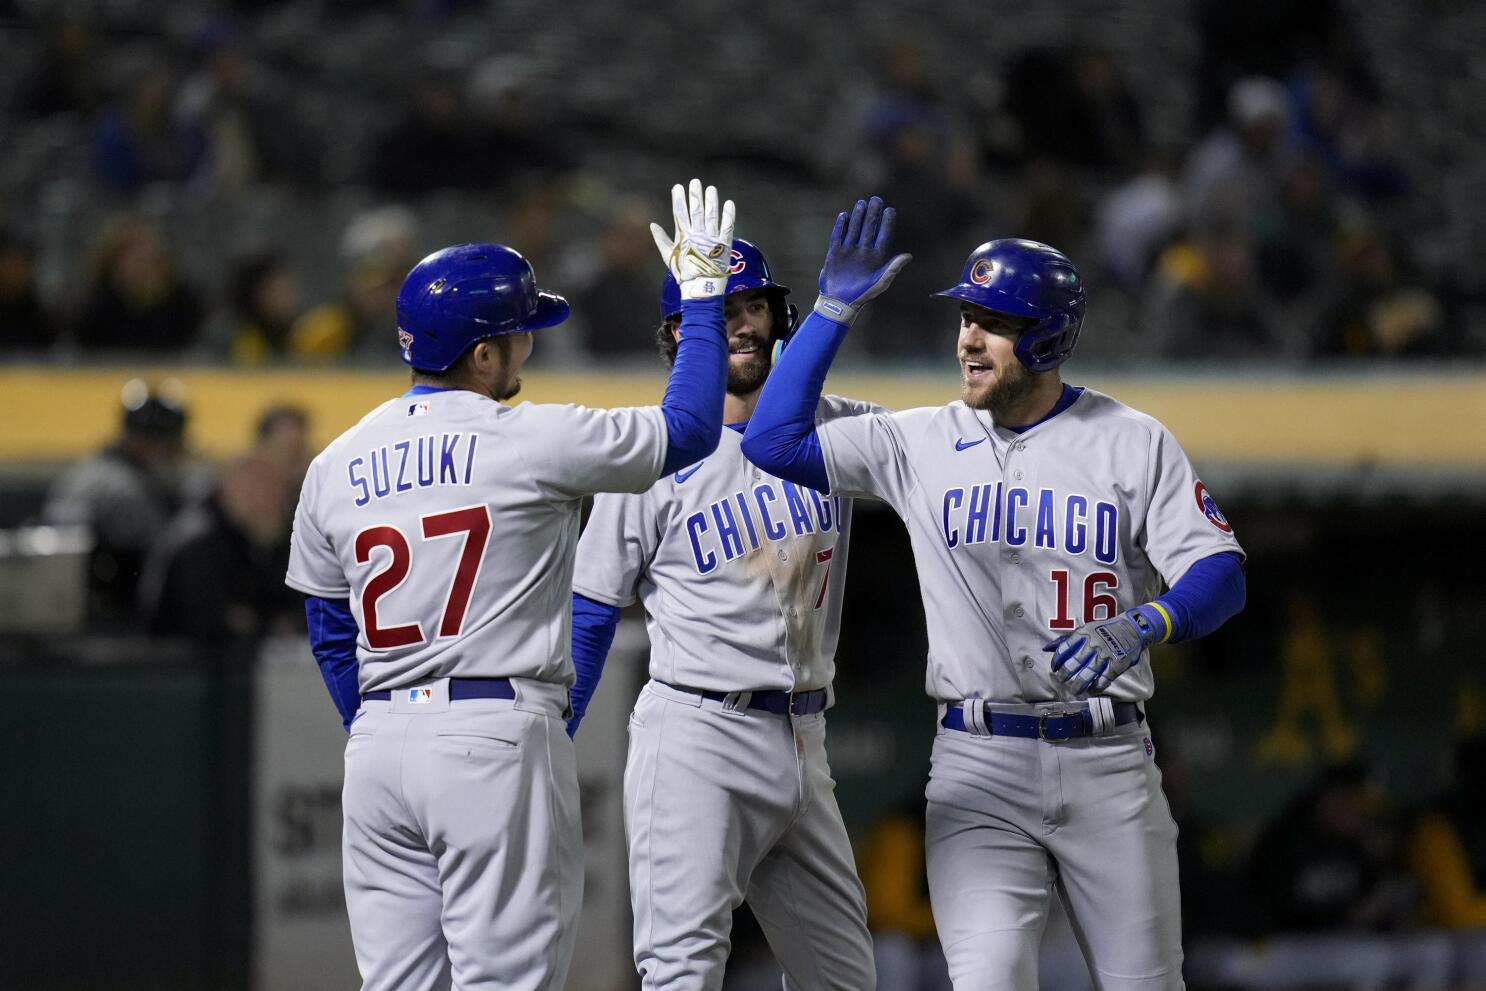 Patrick Wisdom hits 2 more homers as Cubs pound Athletics